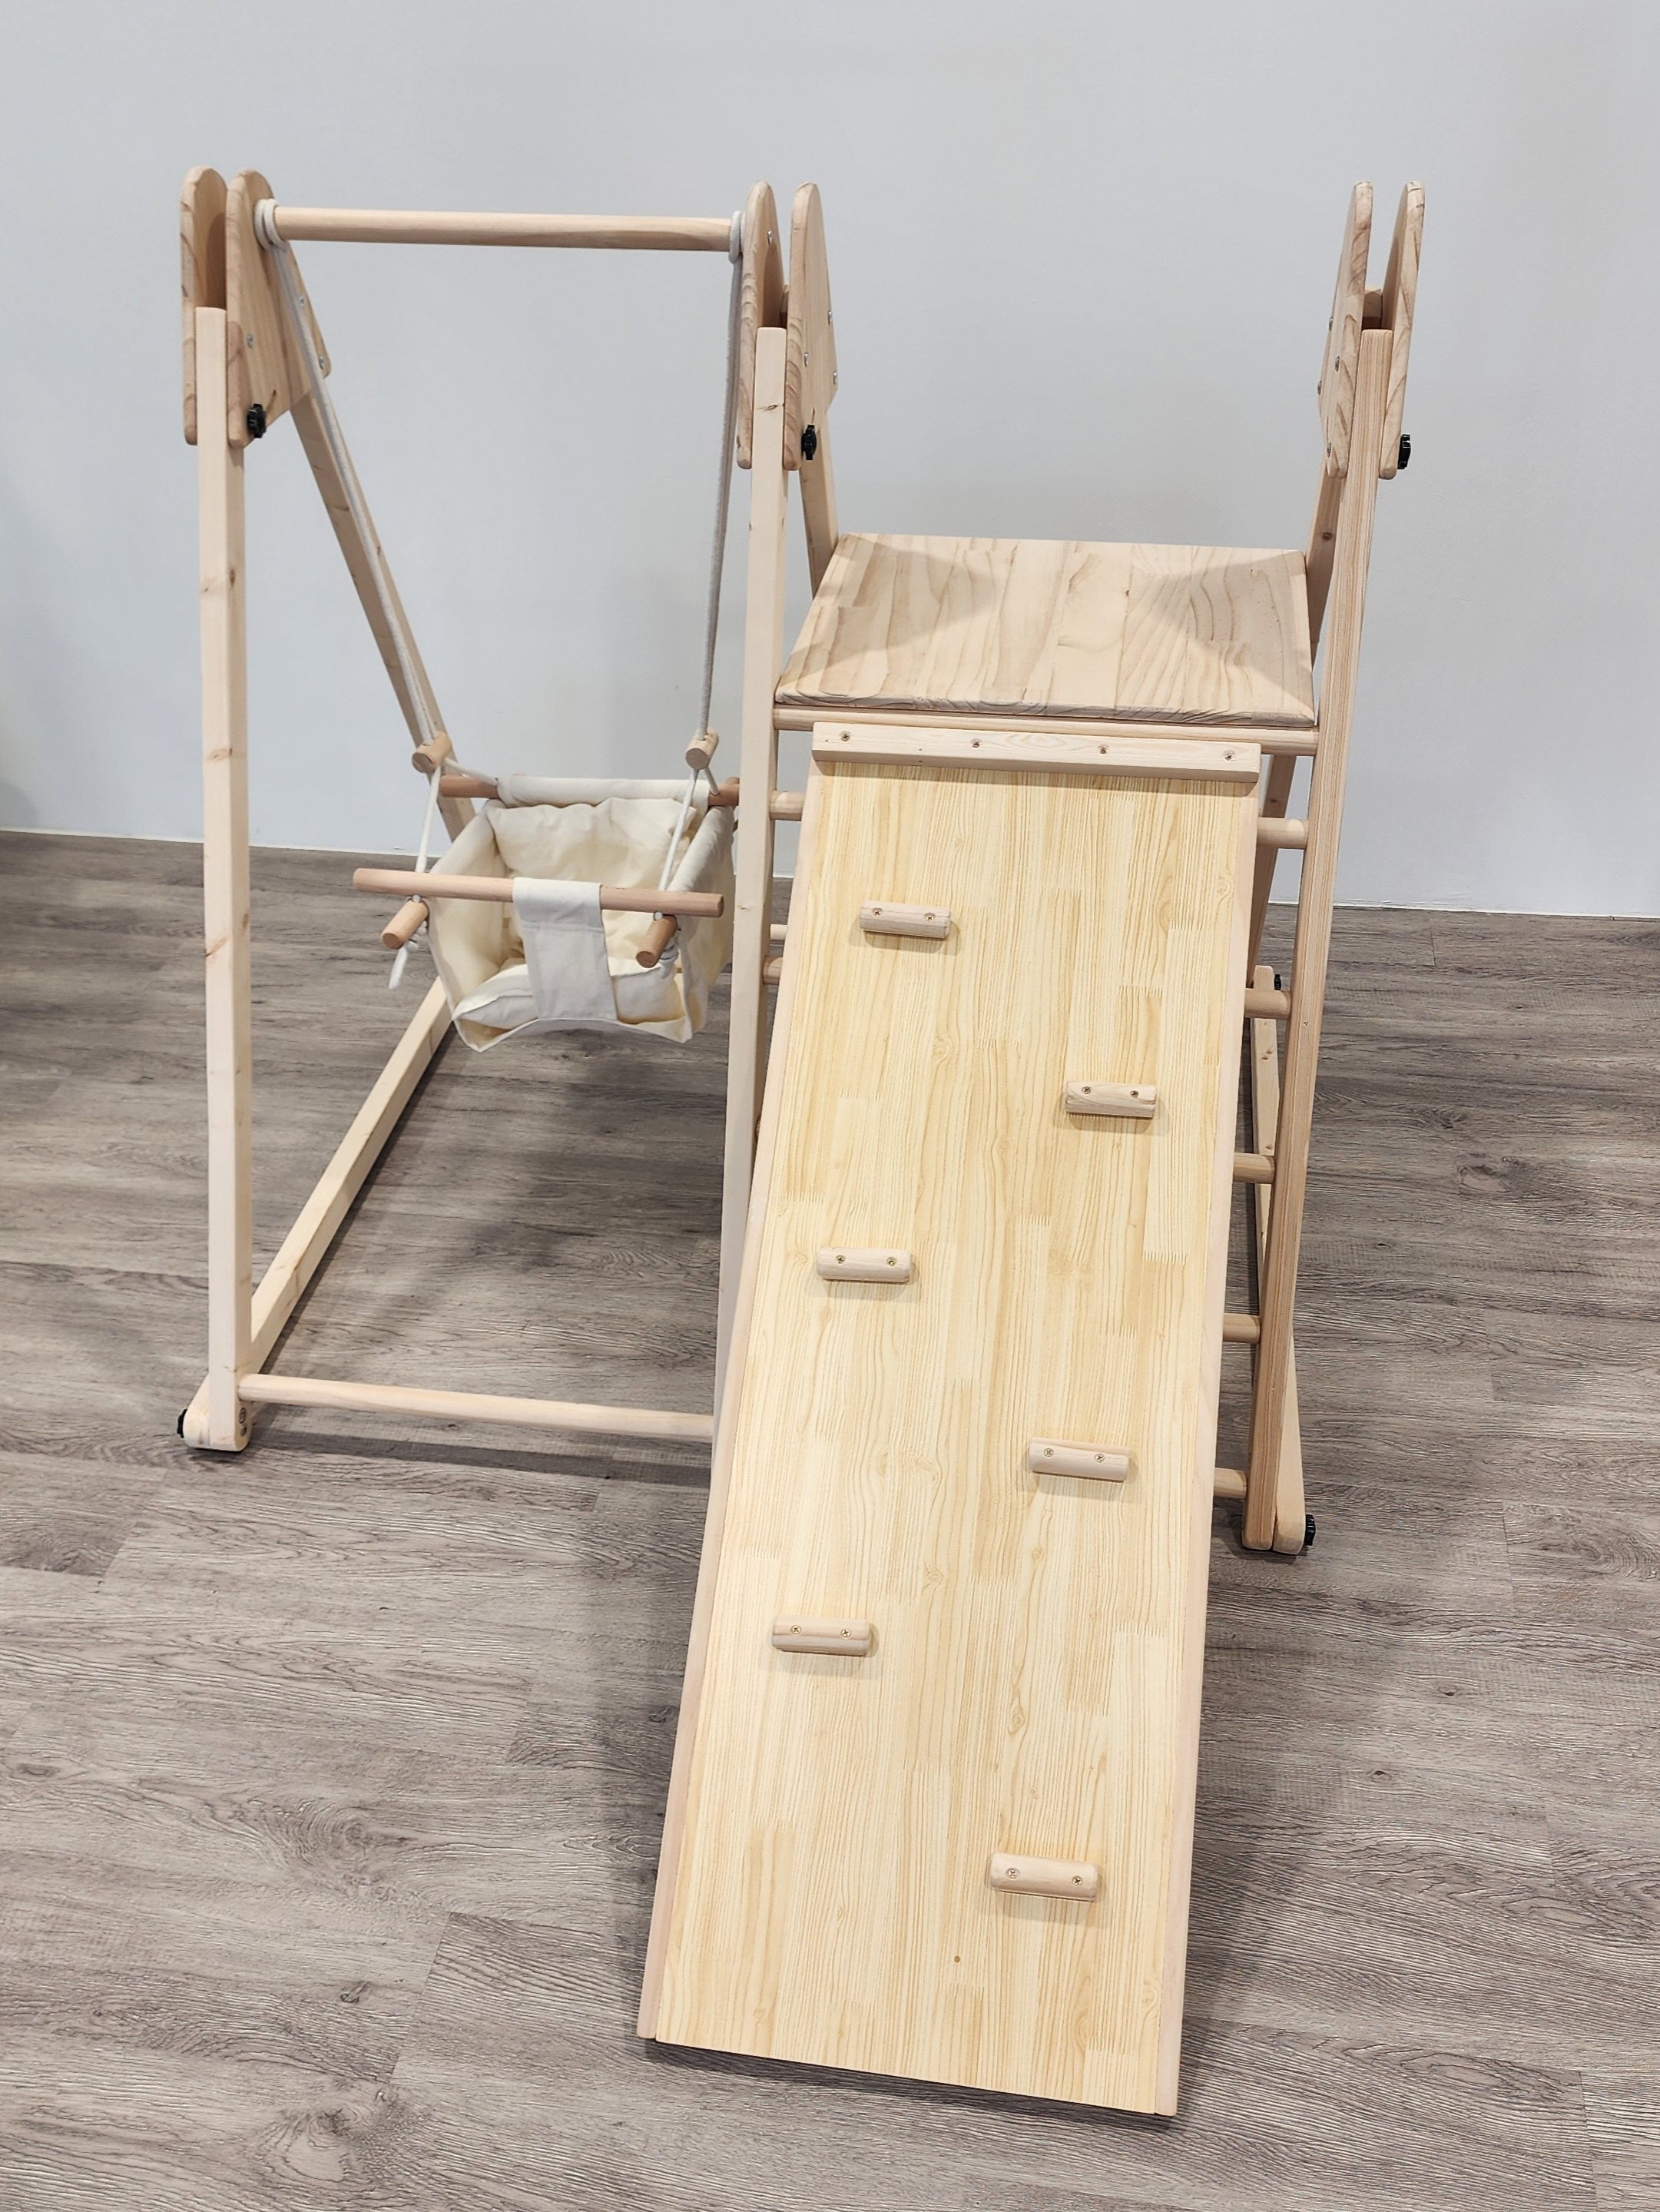 Natural Wood Indoor Gym - Foldable